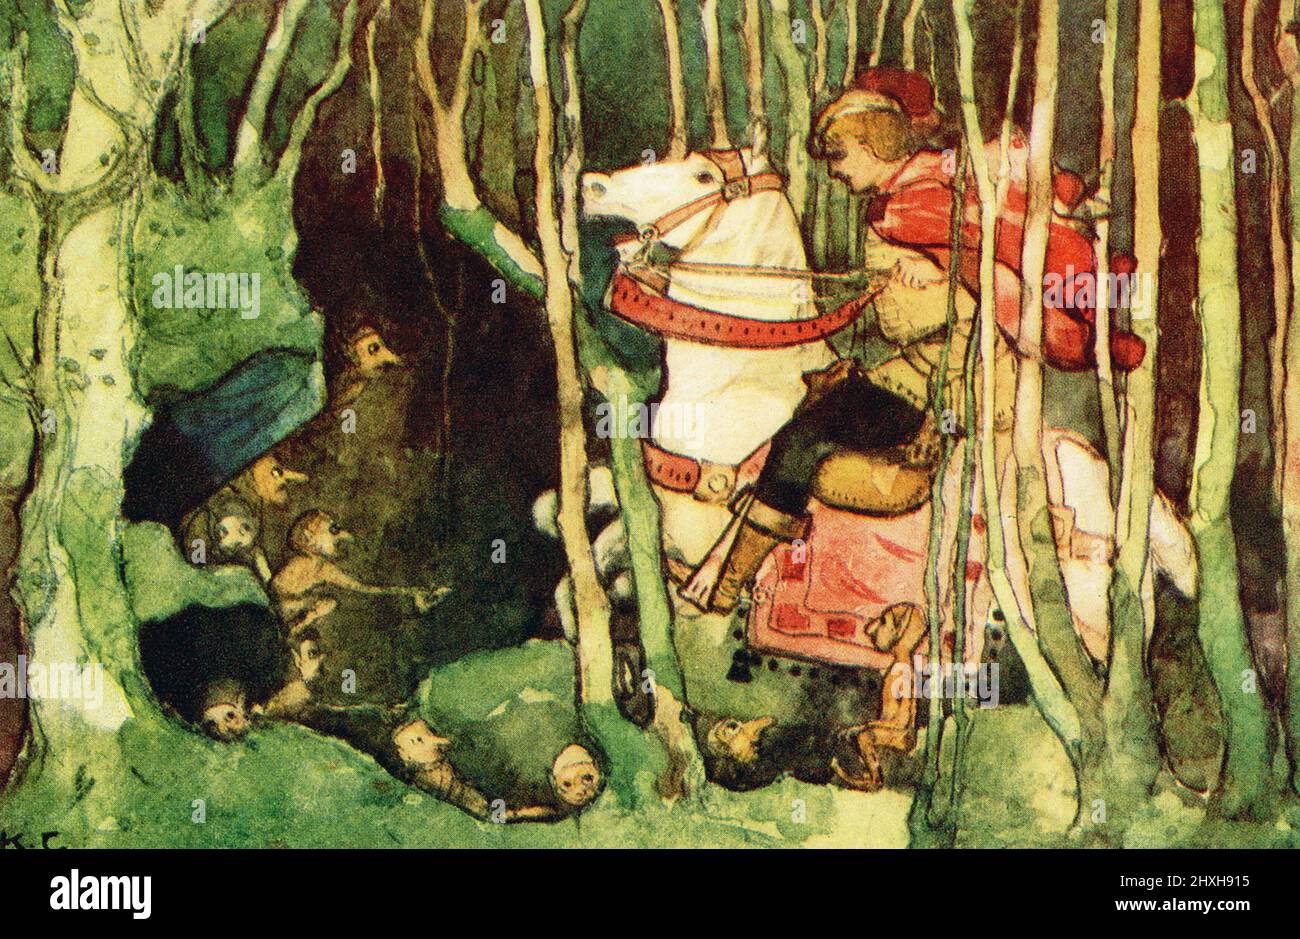 The caption for this 1917 illustration reads: “I saw in a great cavern a group of little goblins - Undine by Friedrich Baron de la Motte Fouque adapted by Mary MacGregor.” The image illustrates Undine, a fairytale novella by Friedrich de la Motte Fouqué in which Undine, a water spirit, marries a knight named Huldebrand in order to gain a soul. Published in 1811, it is an early German romance, which has been translated into English and other languages. Stock Photo